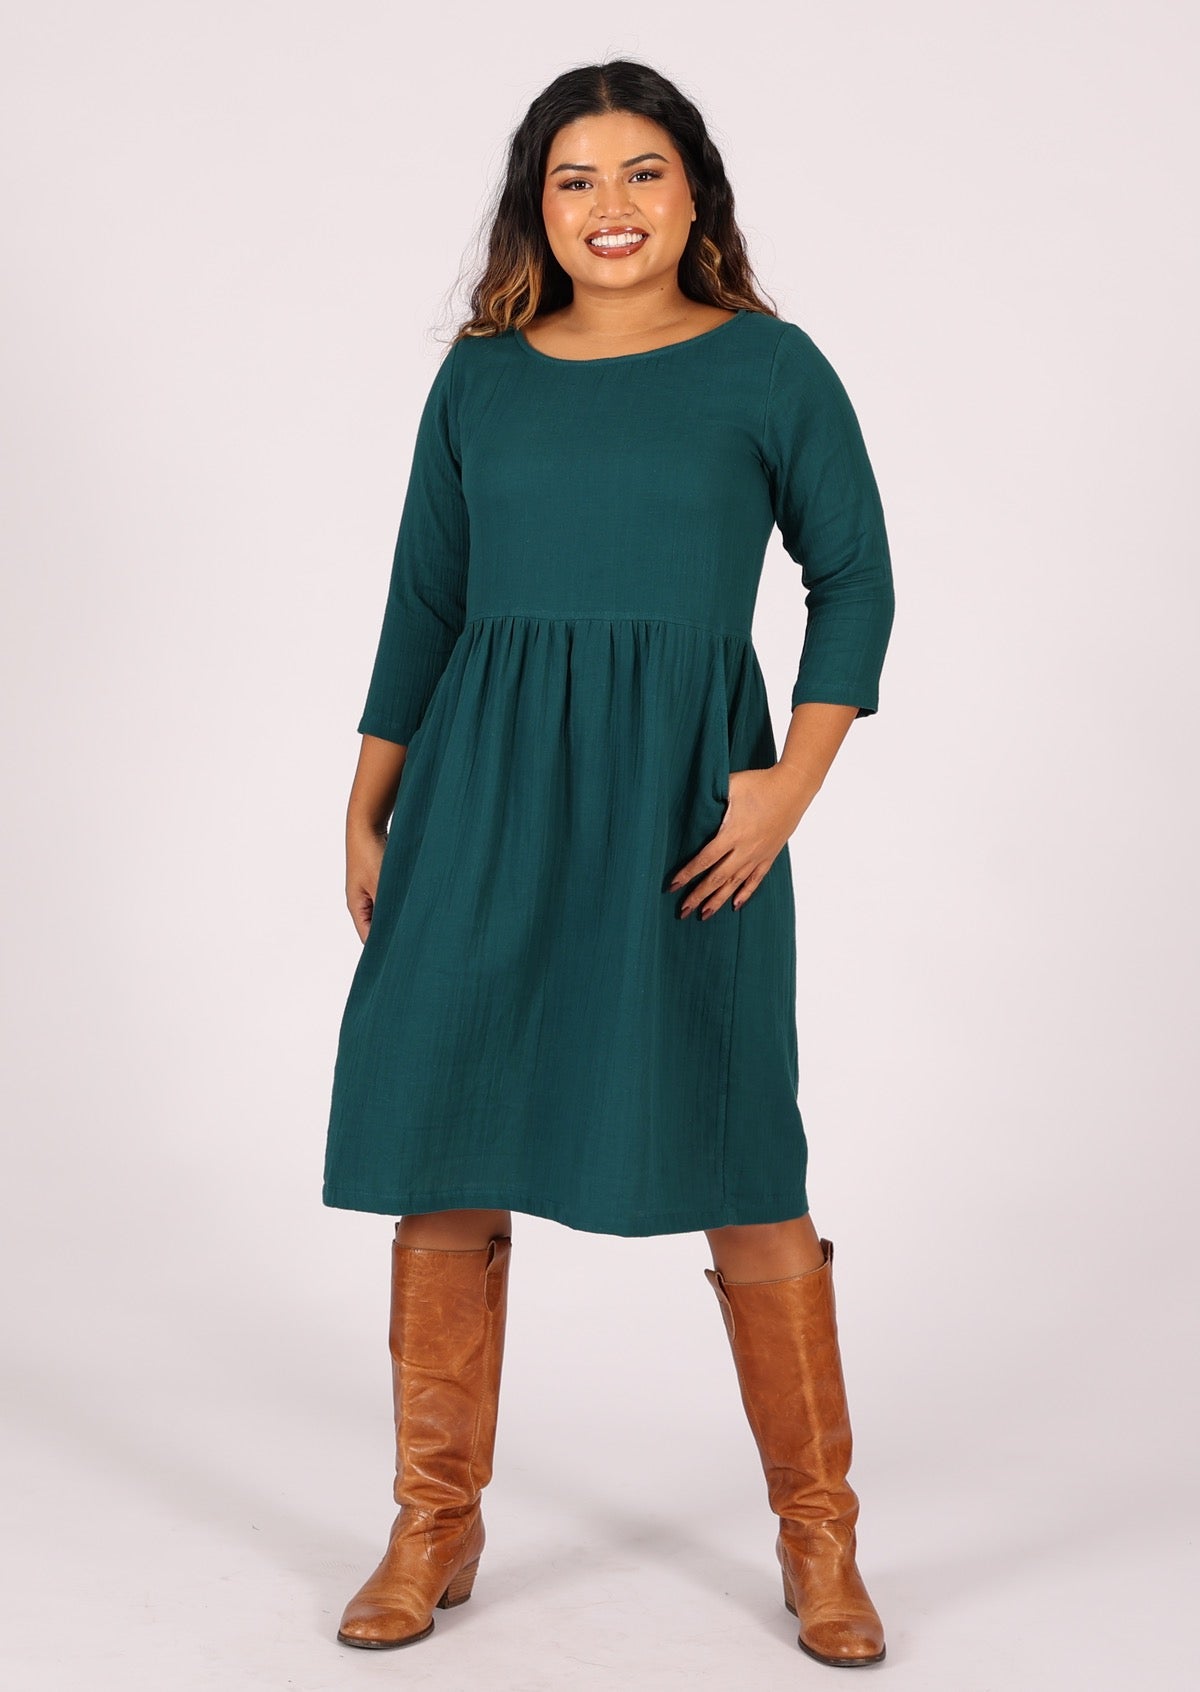 Model wears double layer cotton gauze dress with 3/4 sleeves and pockets